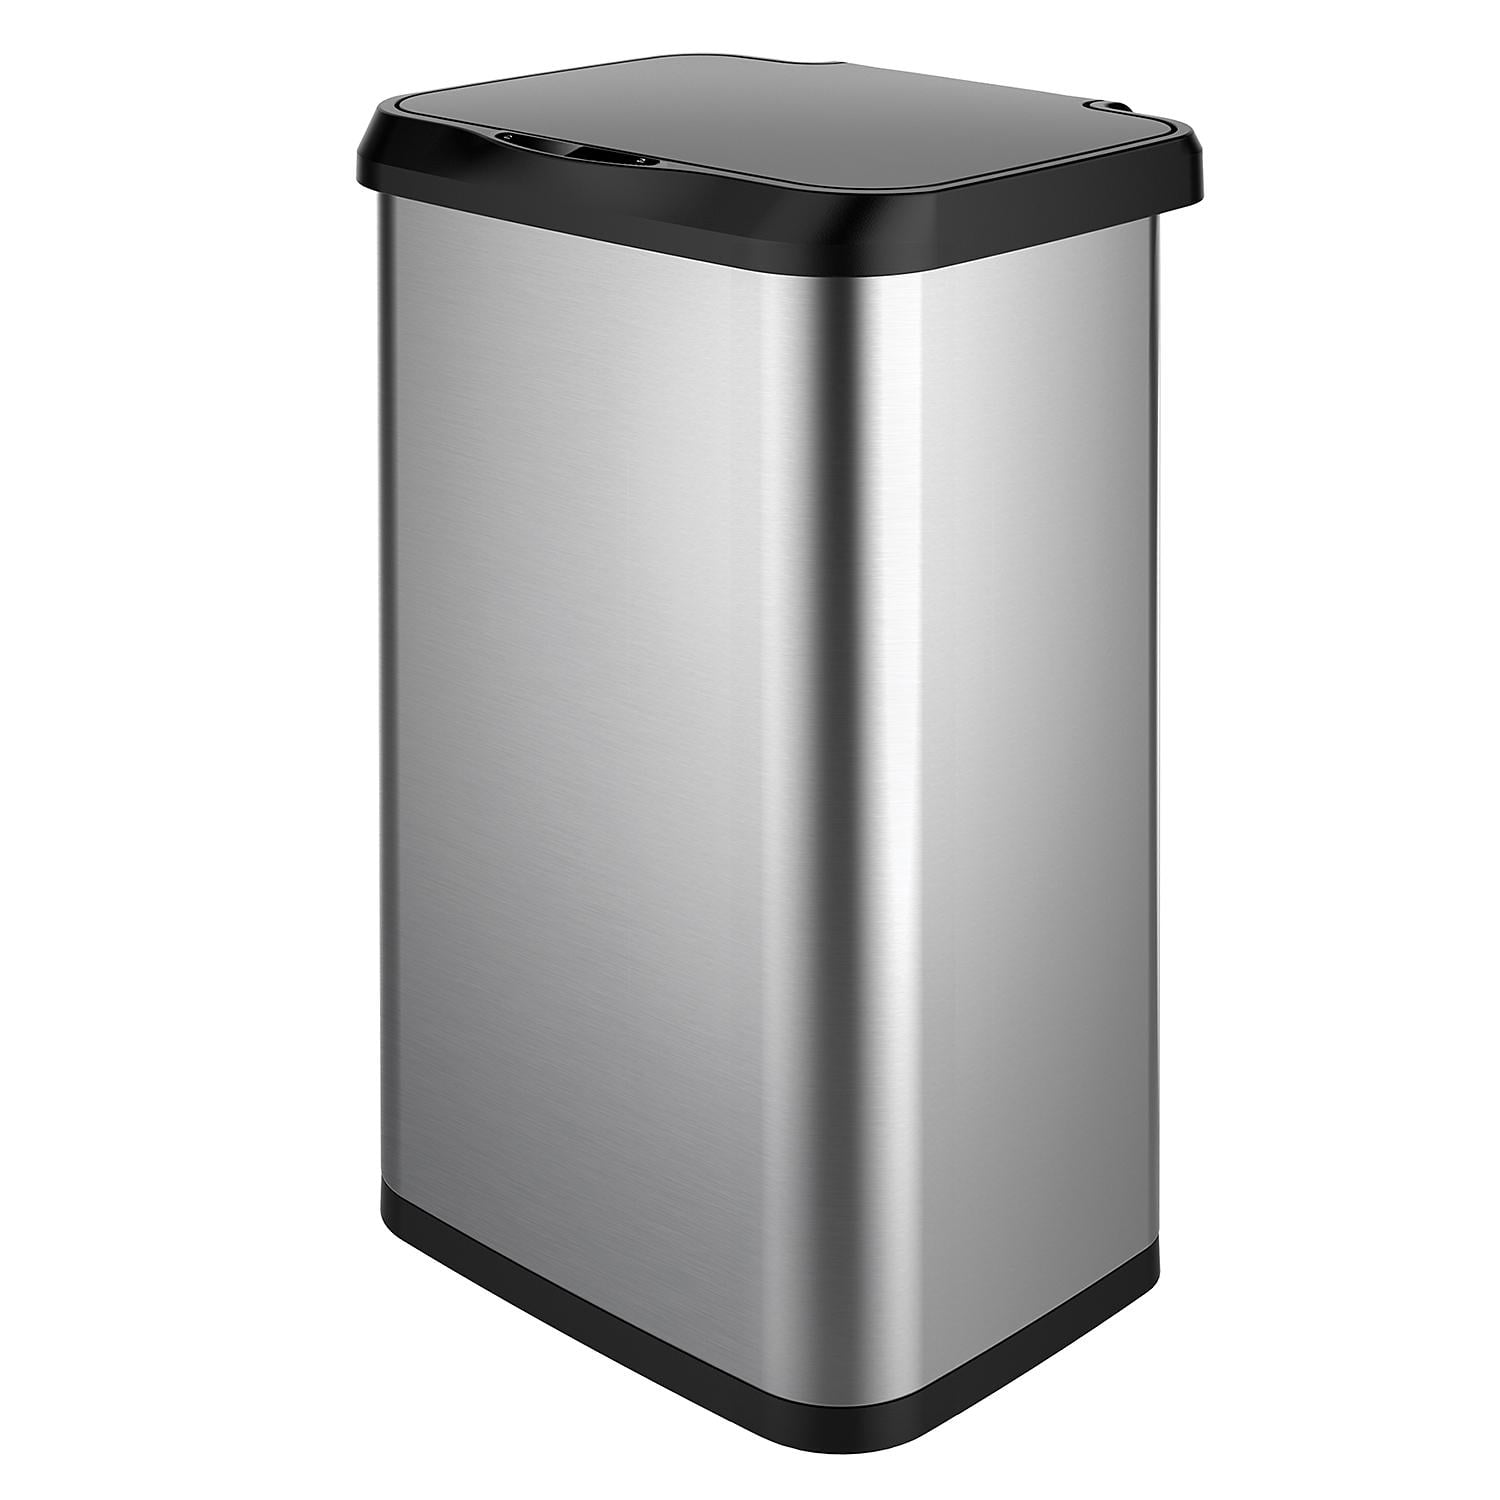 Glad 20-Gallon Stainless Steel Sensor Trash Can - Walmart.com - Walmart.com 20 Gallon Stainless Steel Garbage Can